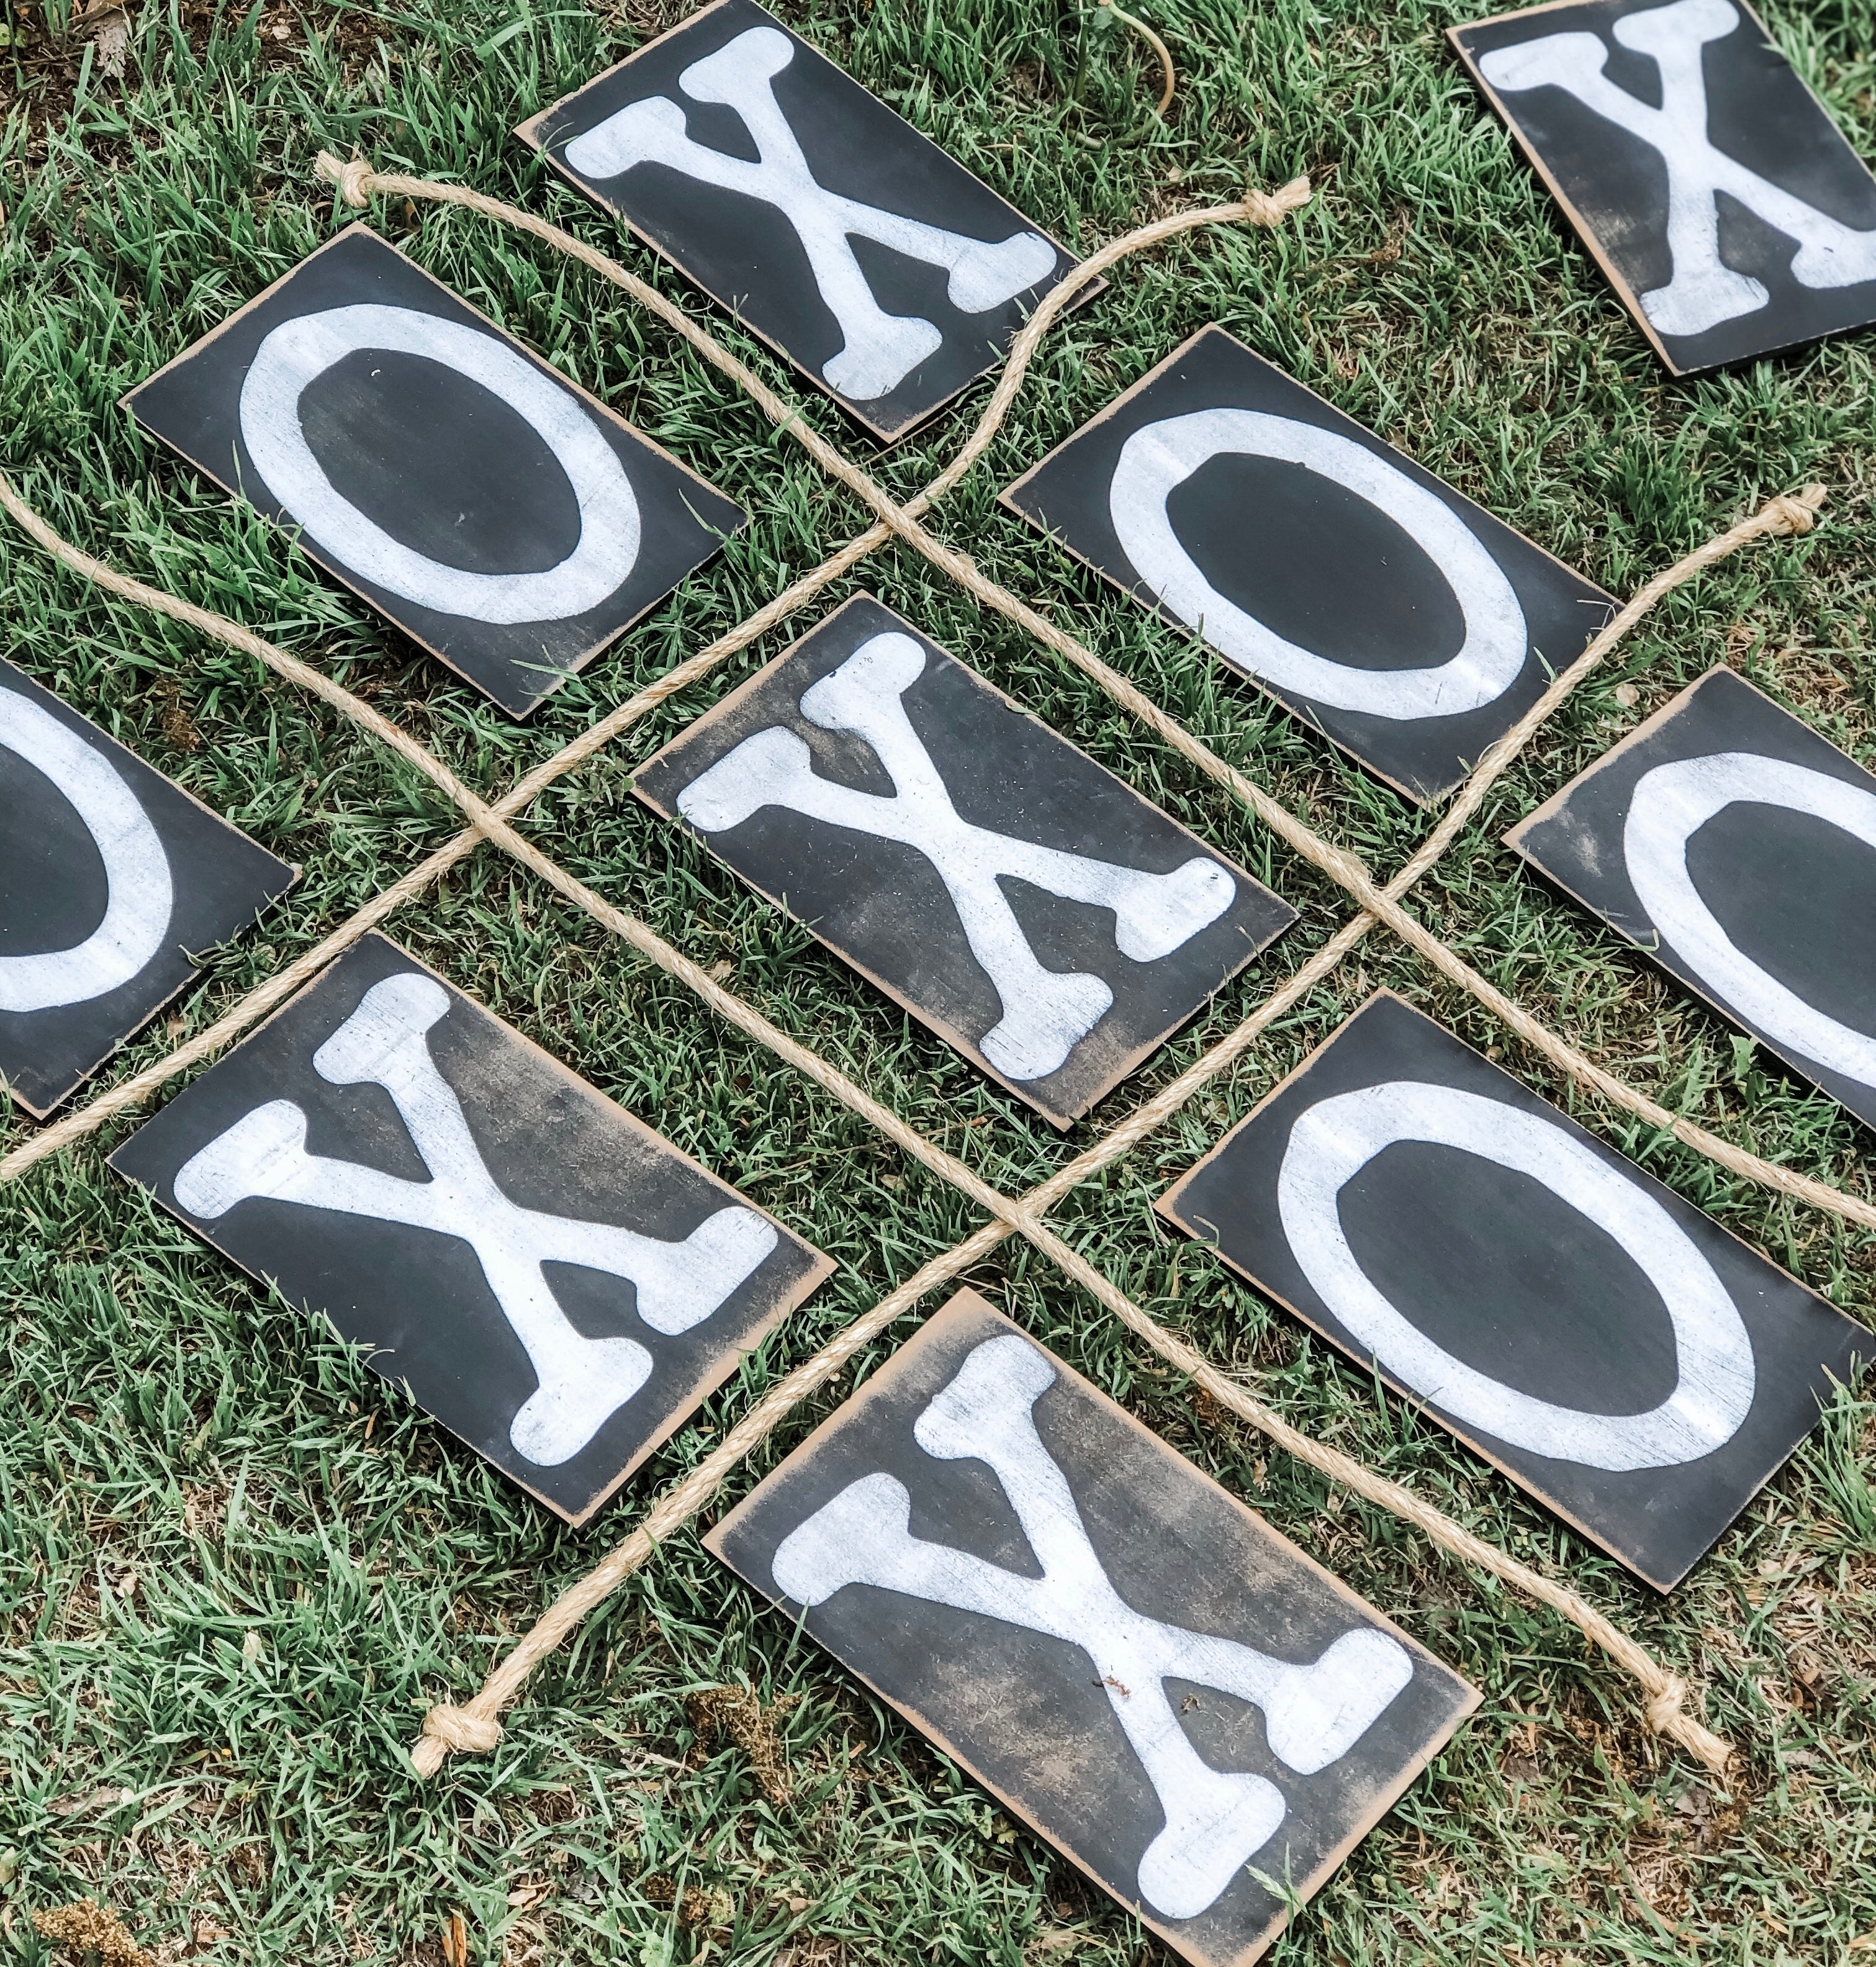 Giant Tic Tac Toe Yard Game - Passion For Savings